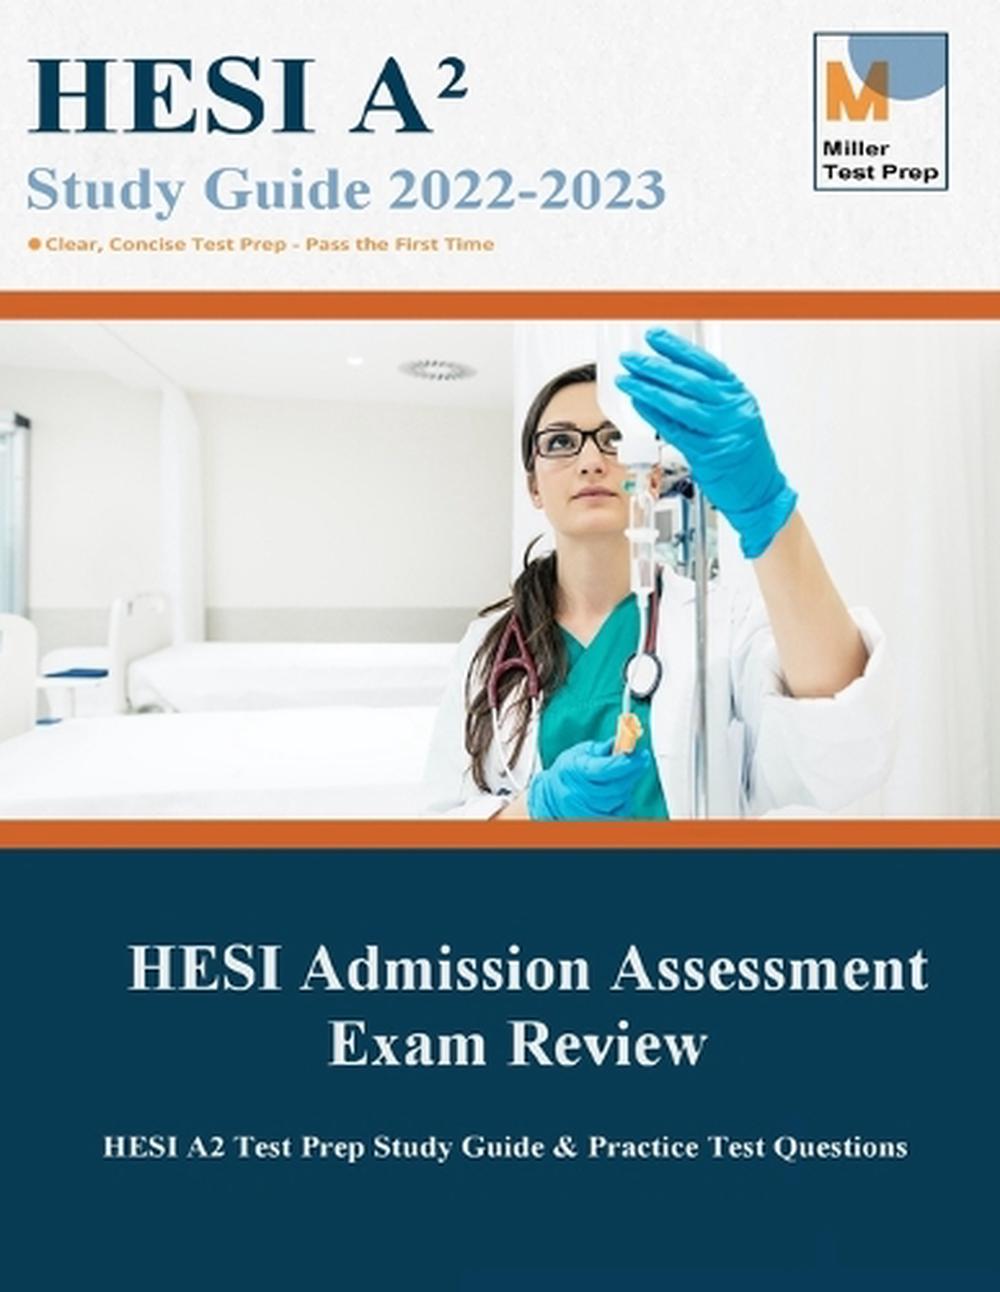 admission assessment exam review pdf download